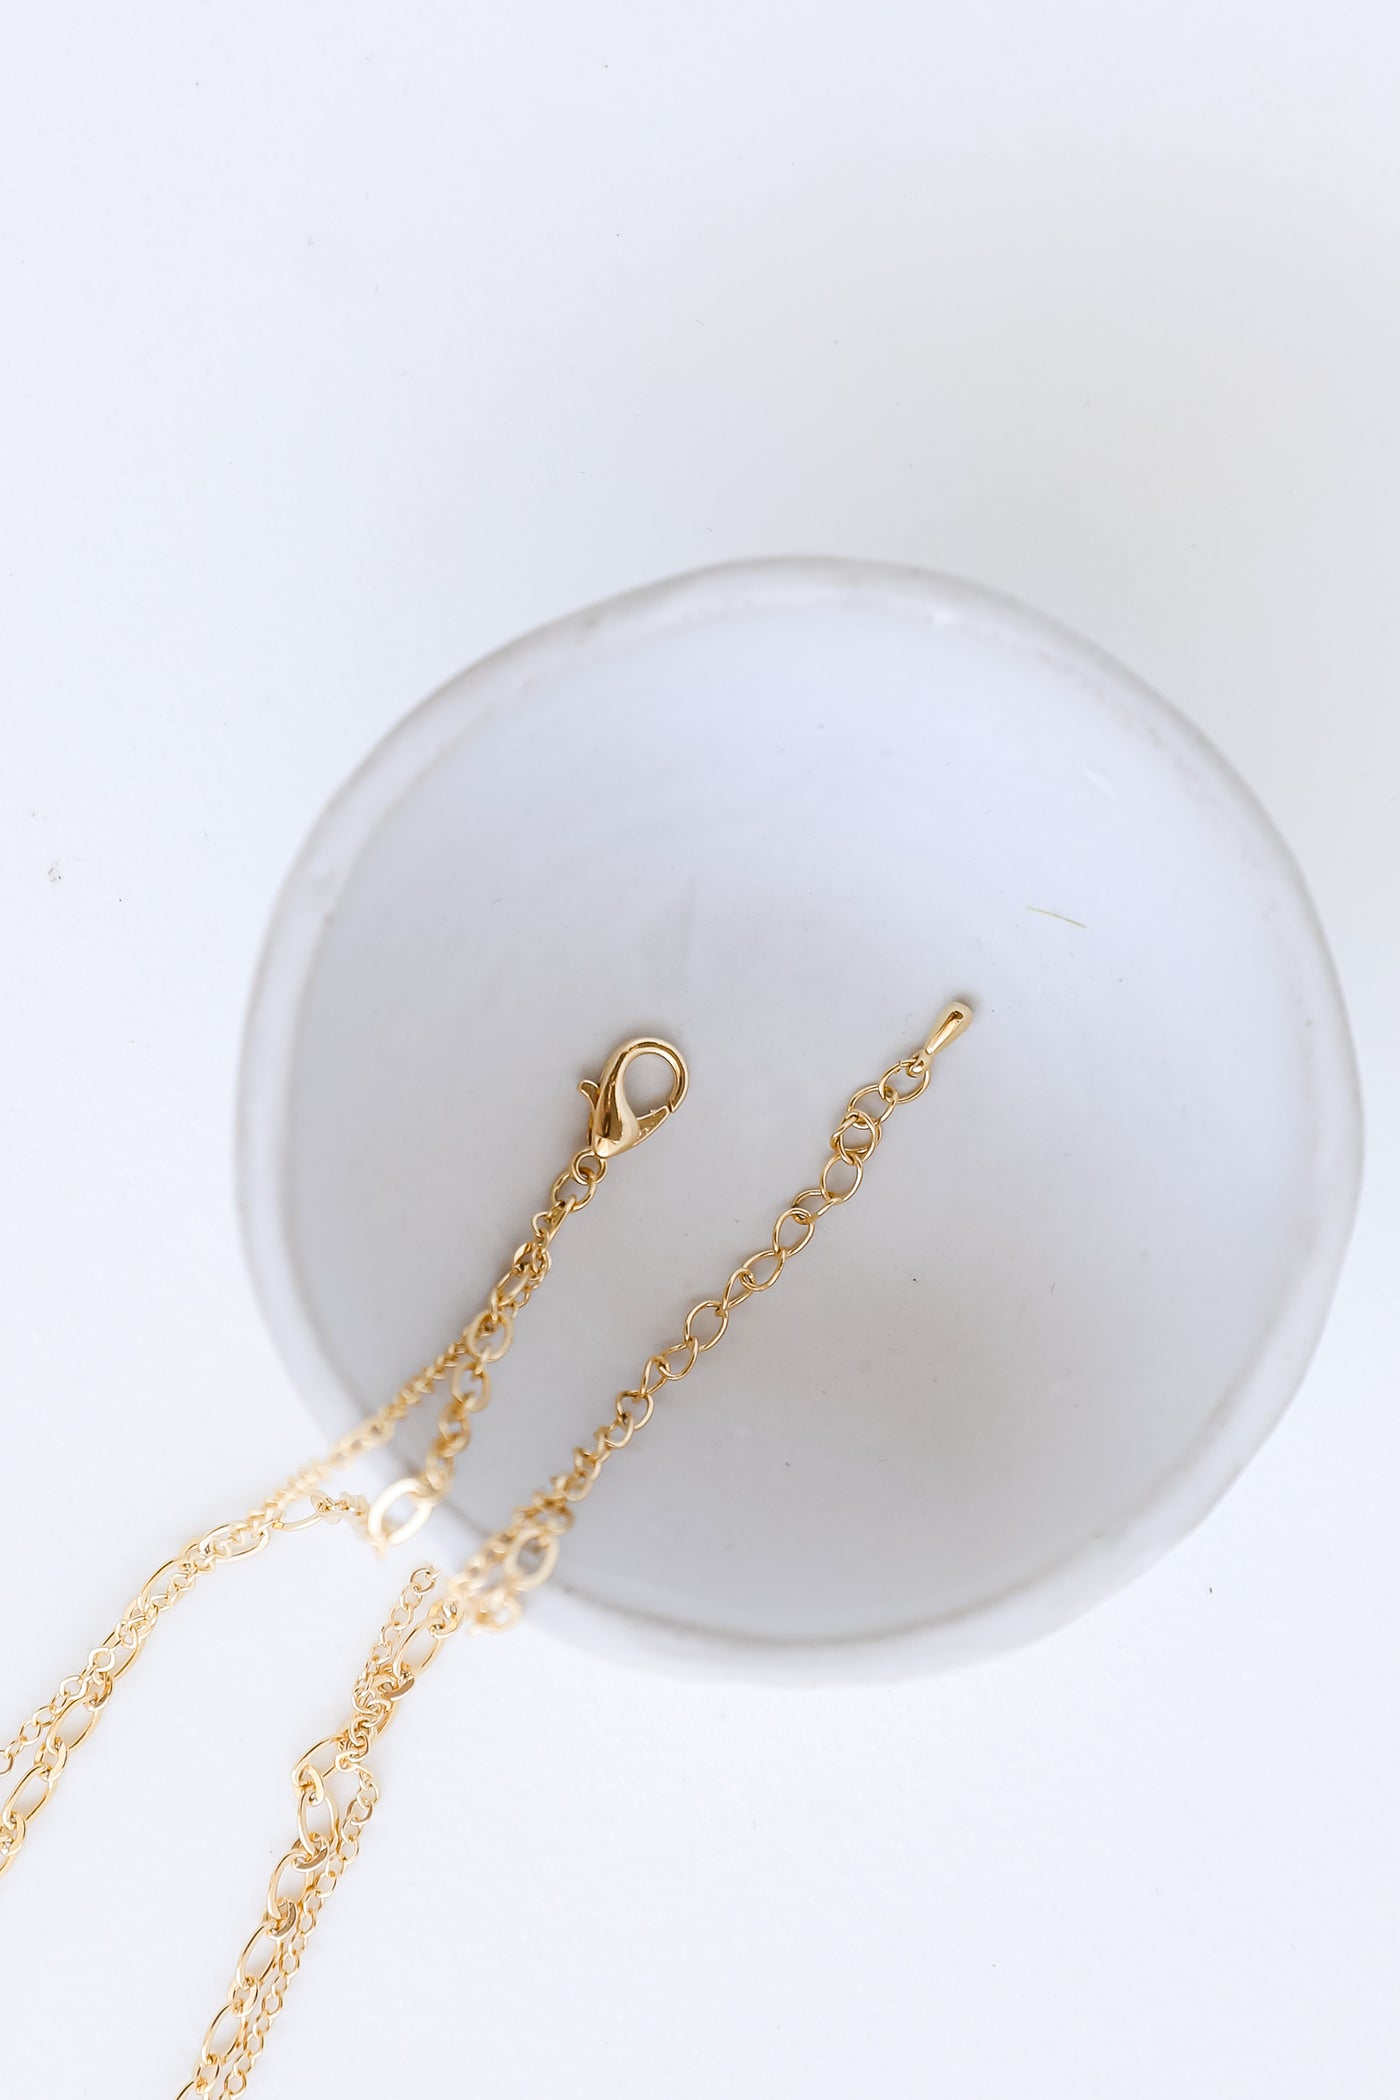 Gold Layered Necklace close up flat lay